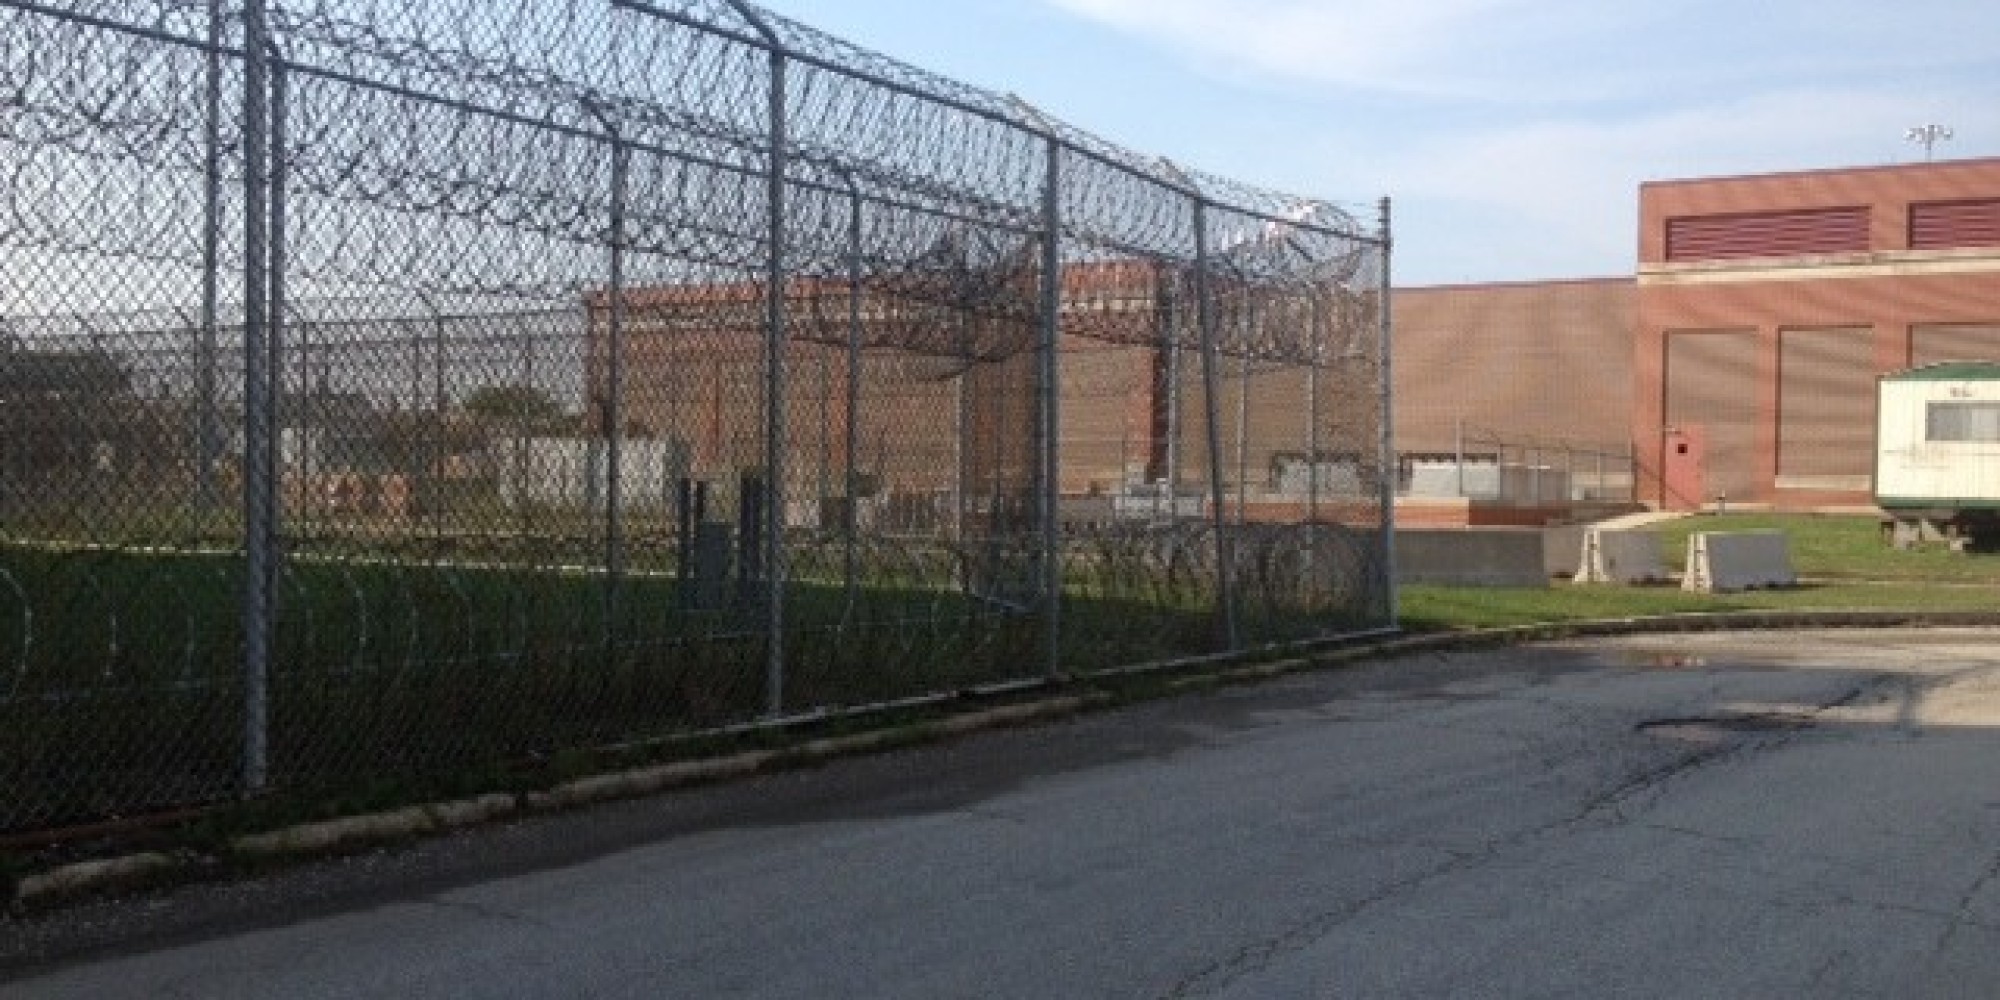 Cook County Jail Inmate Search In Chicago Illinois.